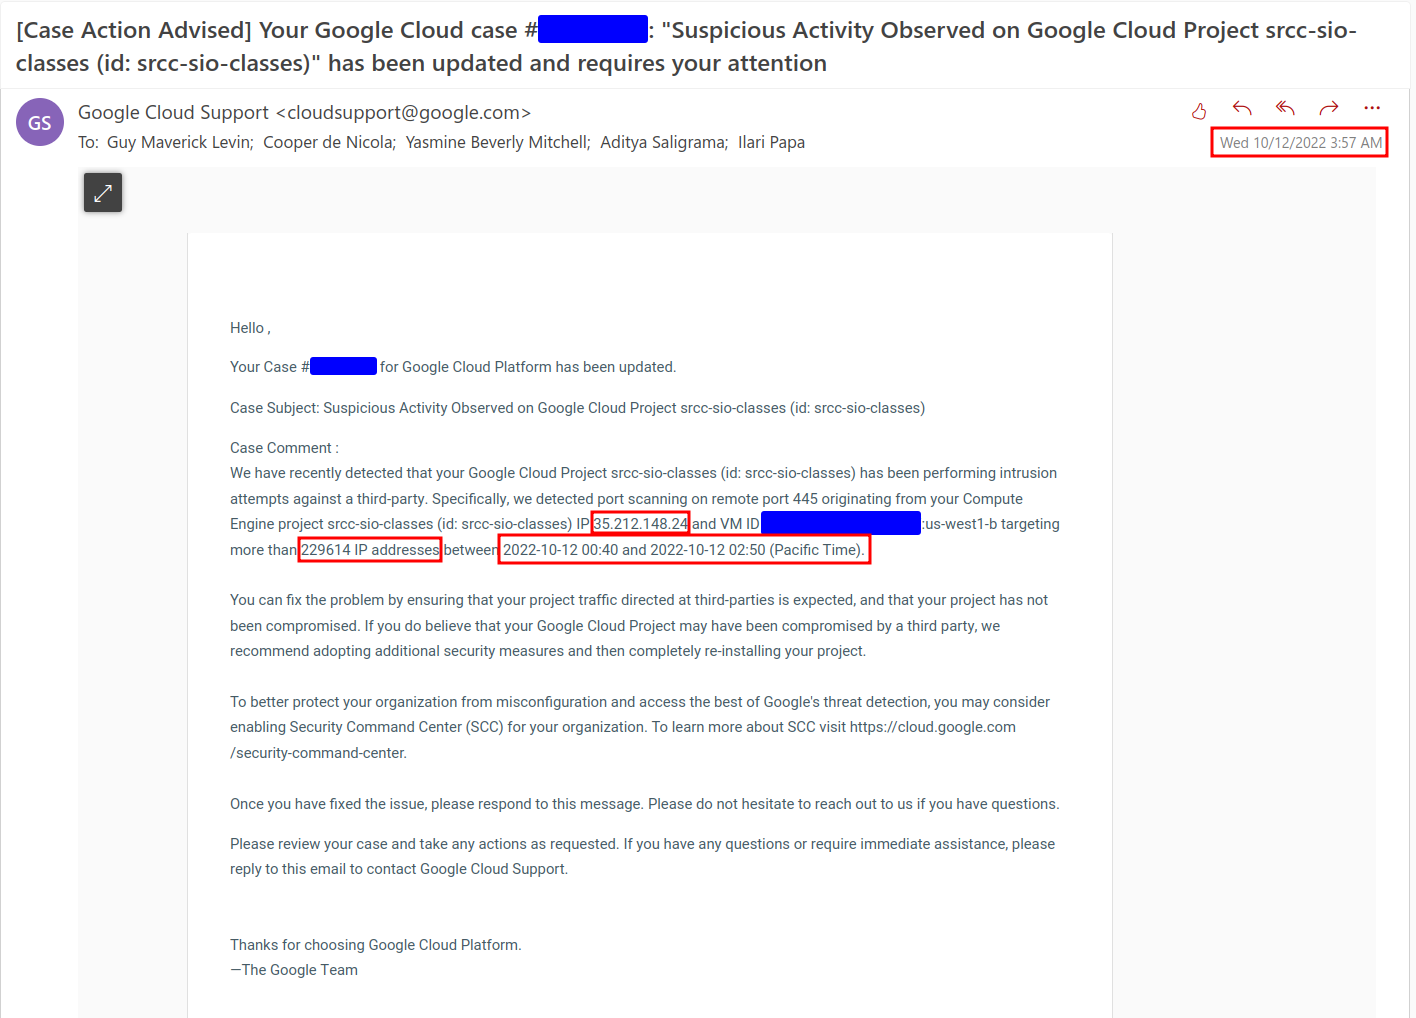 GCP emails us about a possible pwn